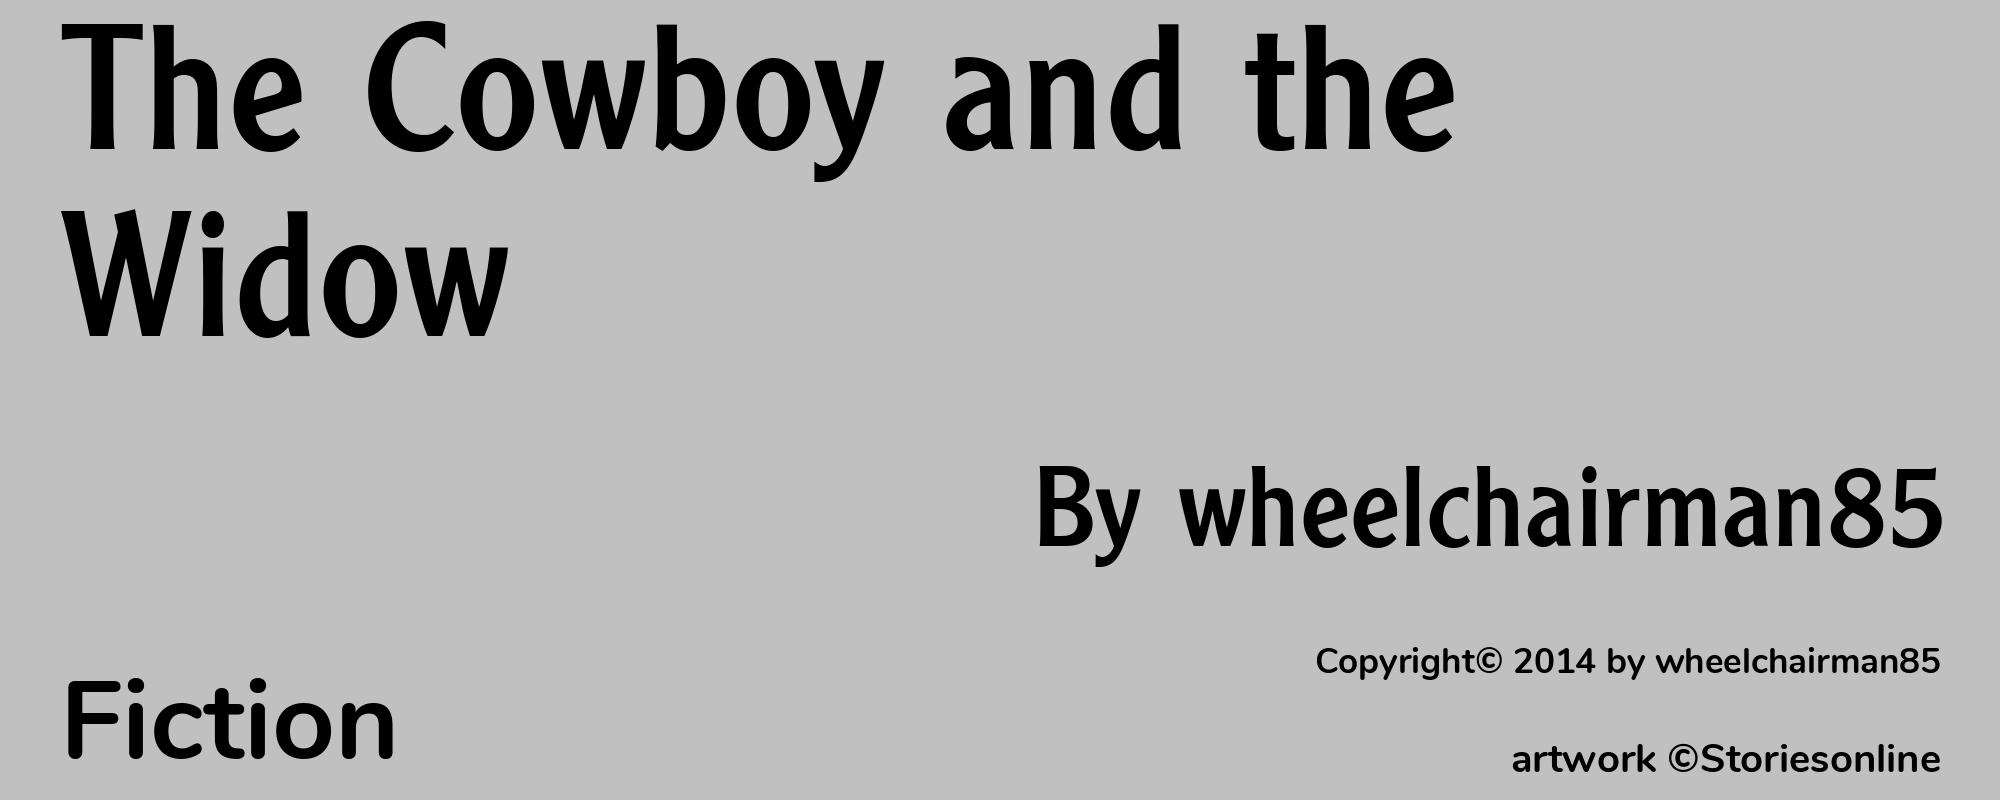 The Cowboy and the Widow - Cover